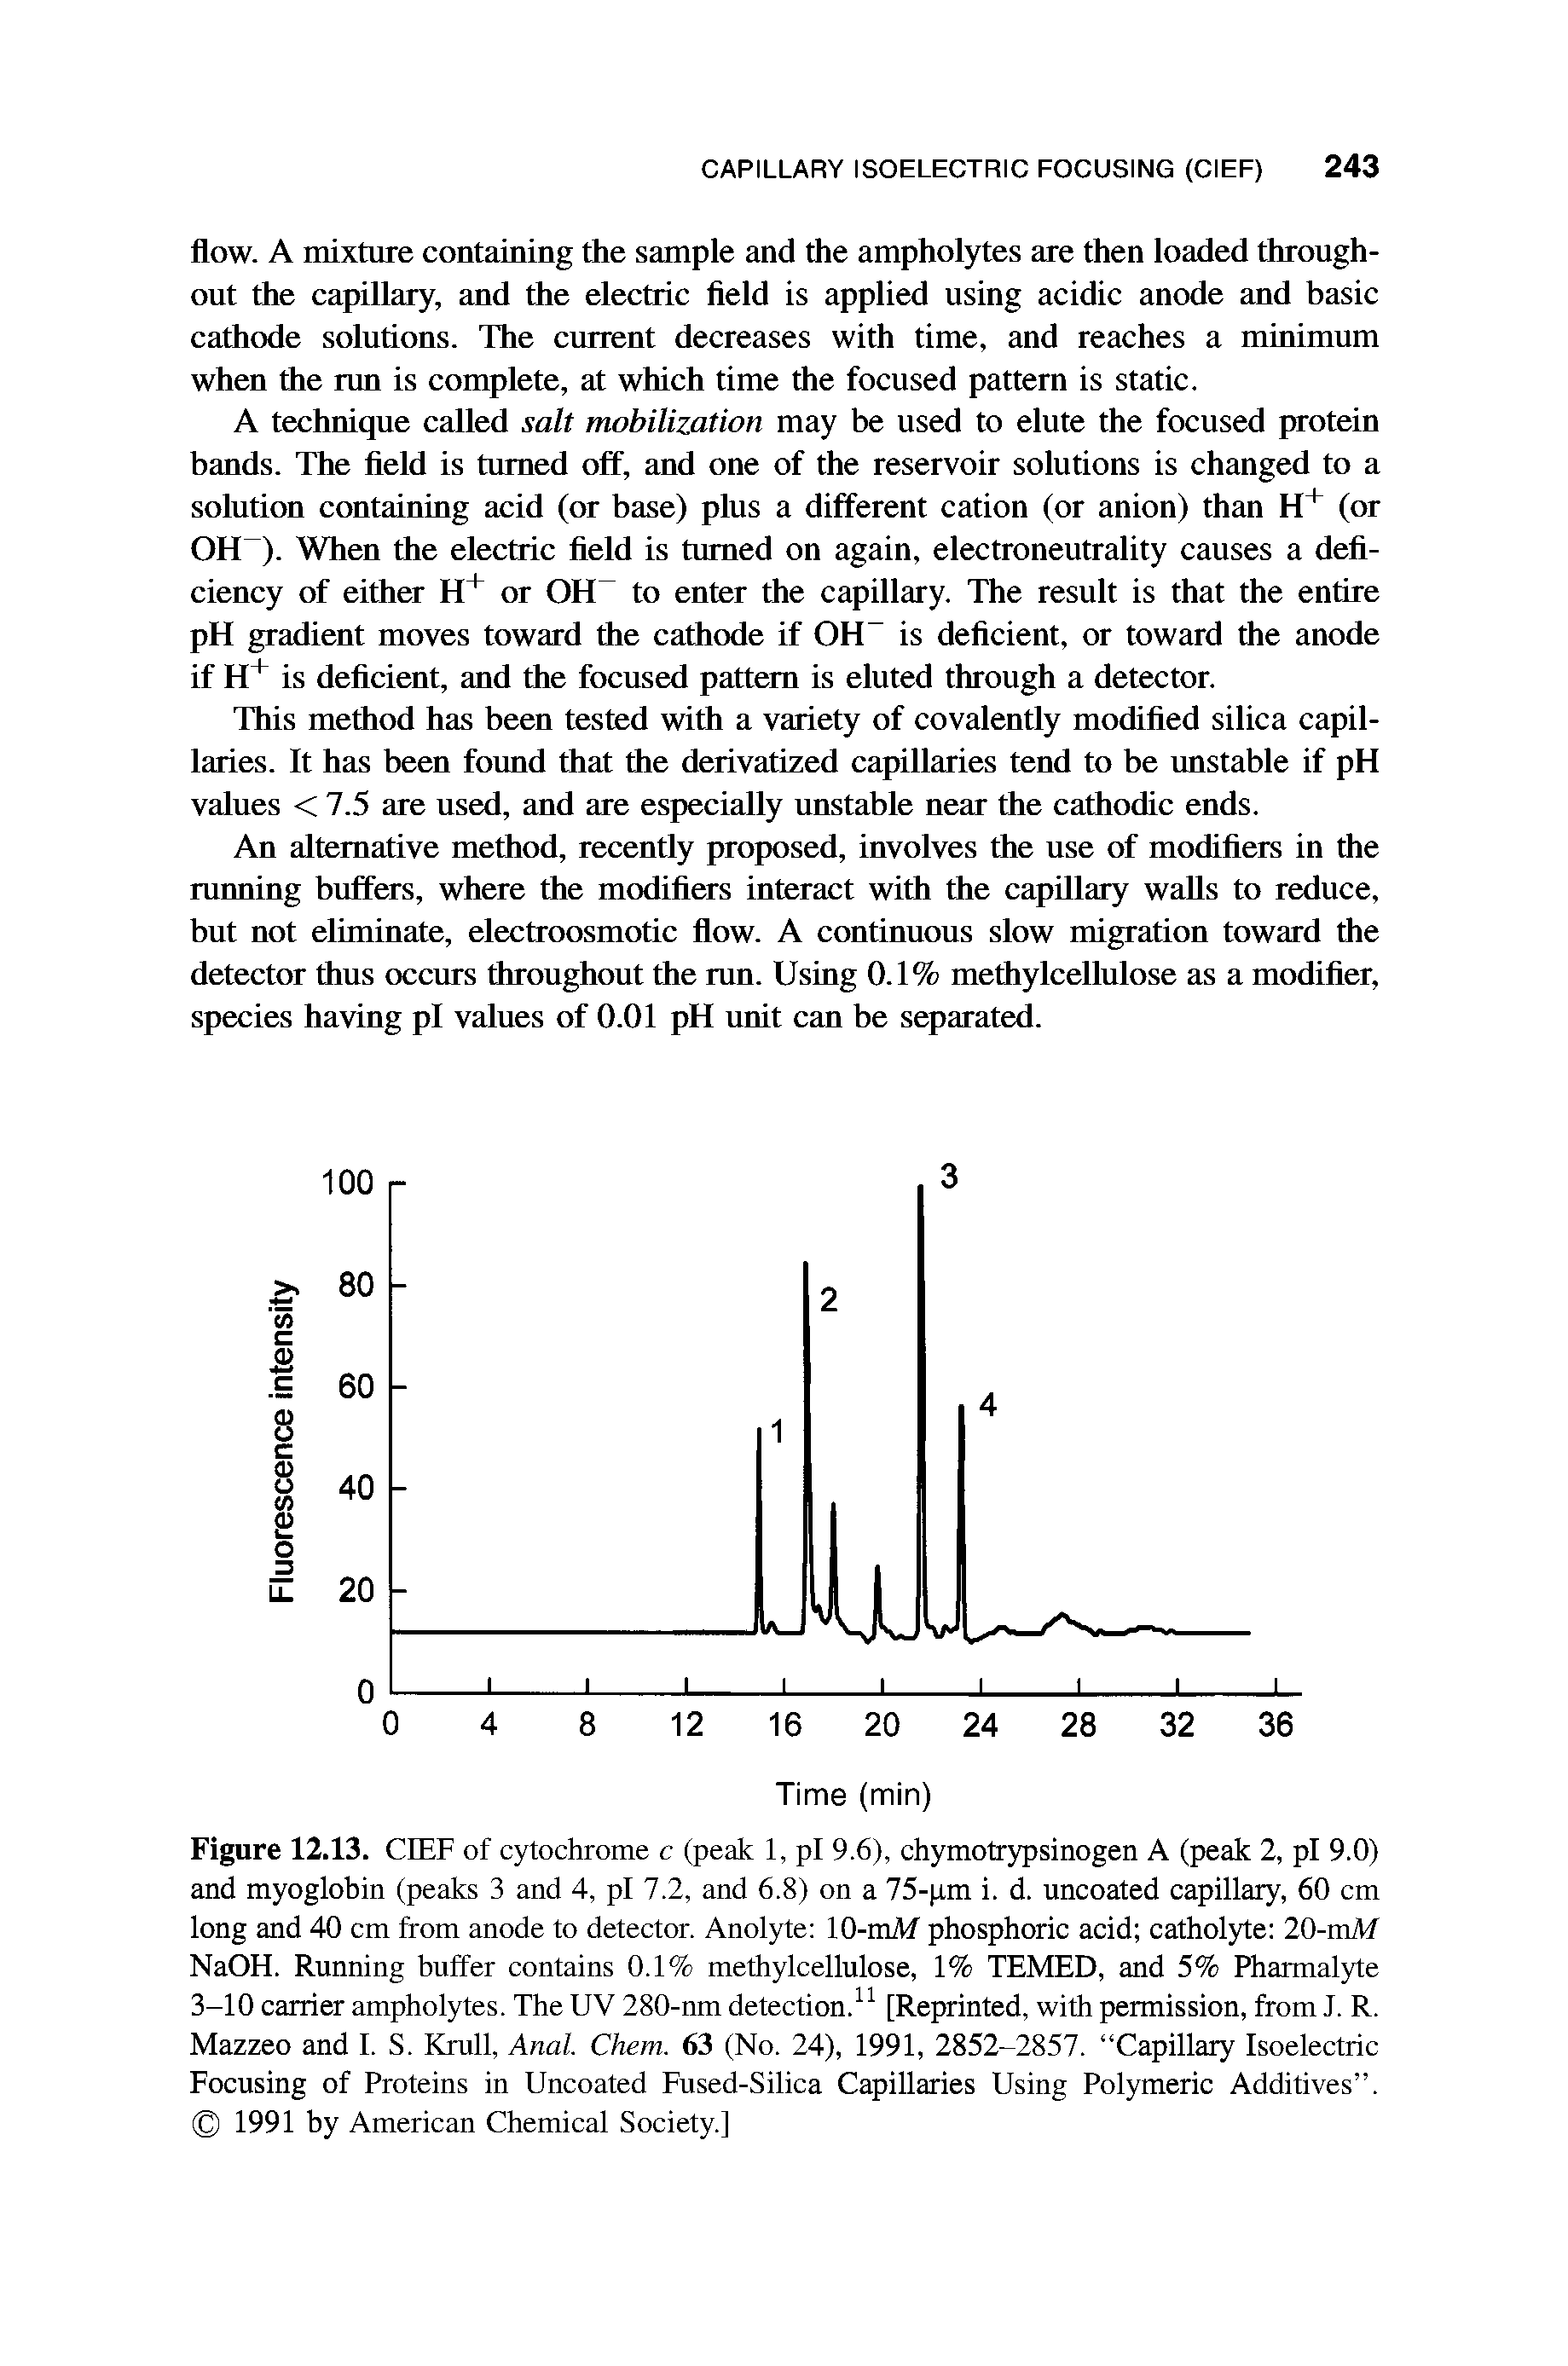 Figure 12.13. CIEF of cytochrome c (peak 1, pi 9.6), chymotrypsinogen A (peak 2, pi 9.0) and myoglobin (peaks 3 and 4, pi 7.2, and 6.8) on a 75-pm i. d. uncoated capillary, 60 cm long and 40 cm from anode to detector. Anolyte 10-mM phosphoric acid catholyte 20-mM NaOH. Running buffer contains 0.1% methylcellulose, 1% TEMED, and 5% Pharmalyte 3-10 carrier ampholytes. The UV 280-nm detection.11 [Reprinted, with permission, from J. R. Mazzeo and I. S. Krull, Anal. Chem. 63 (No. 24), 1991, 2852-2857. Capillary Isoelectric Focusing of Proteins in Uncoated Fused-Silica Capillaries Using Polymeric Additives . 1991 by American Chemical Society.]...